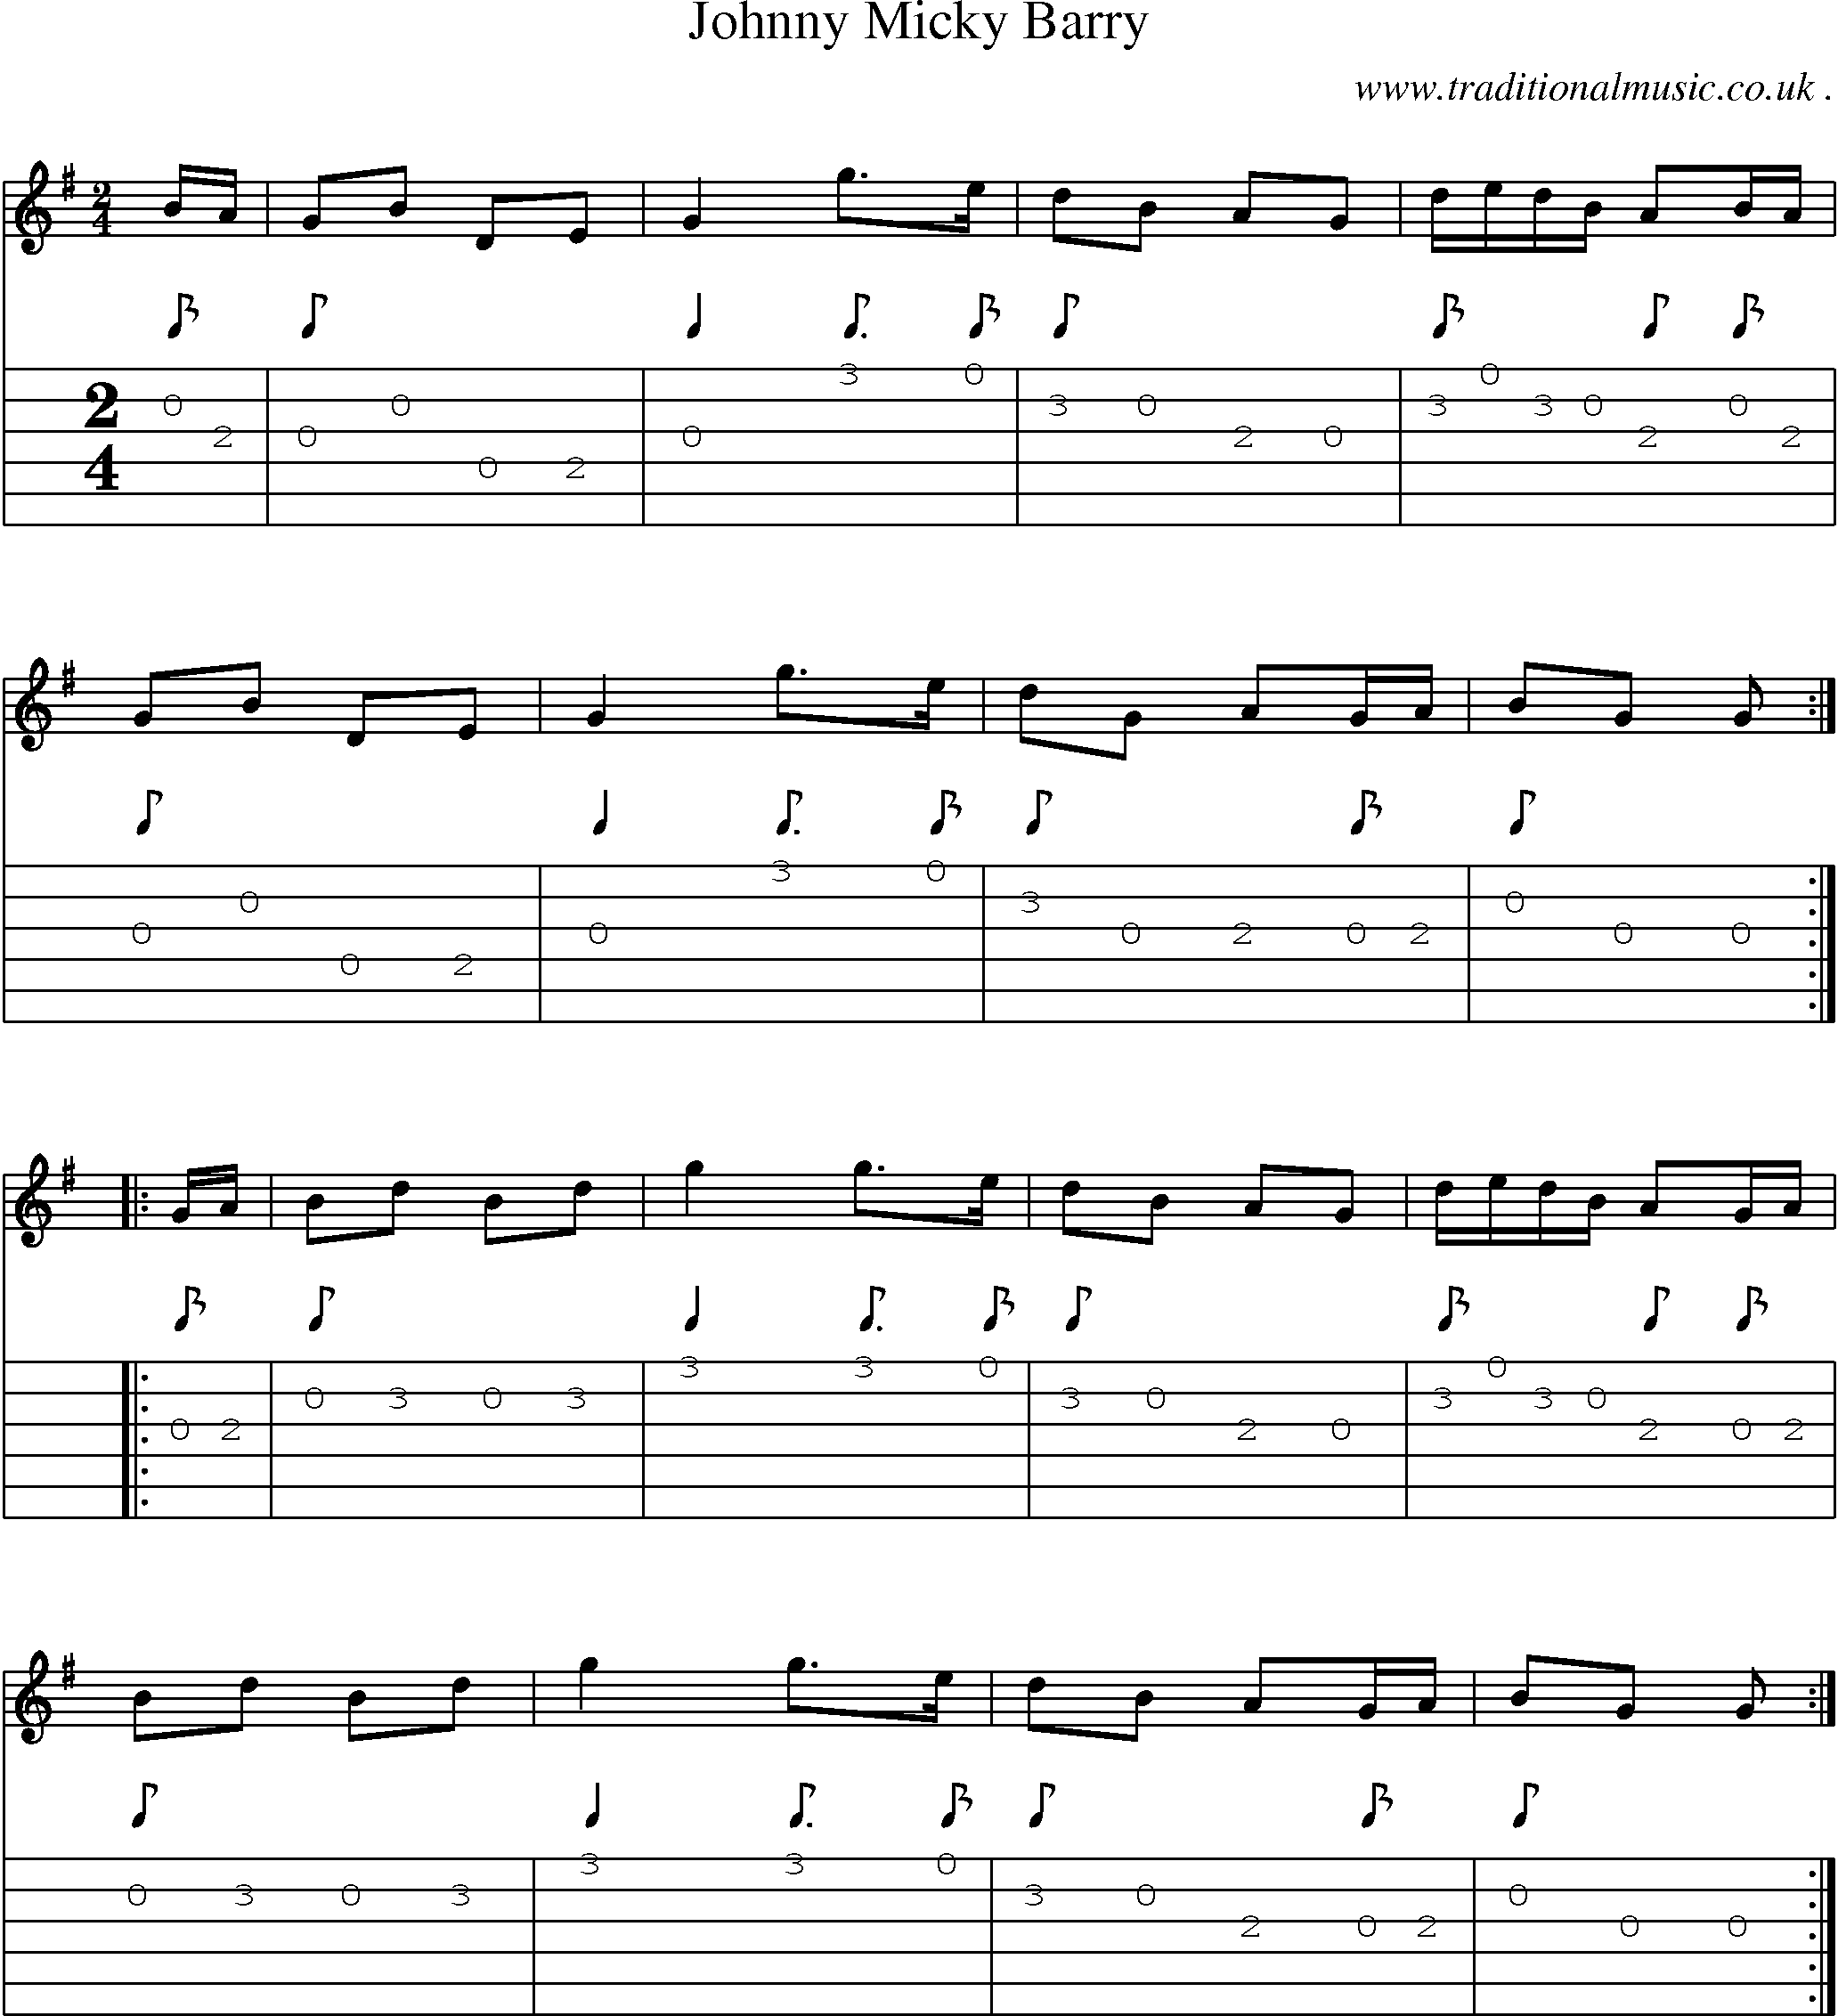 Sheet-Music and Guitar Tabs for Johnny Micky Barry